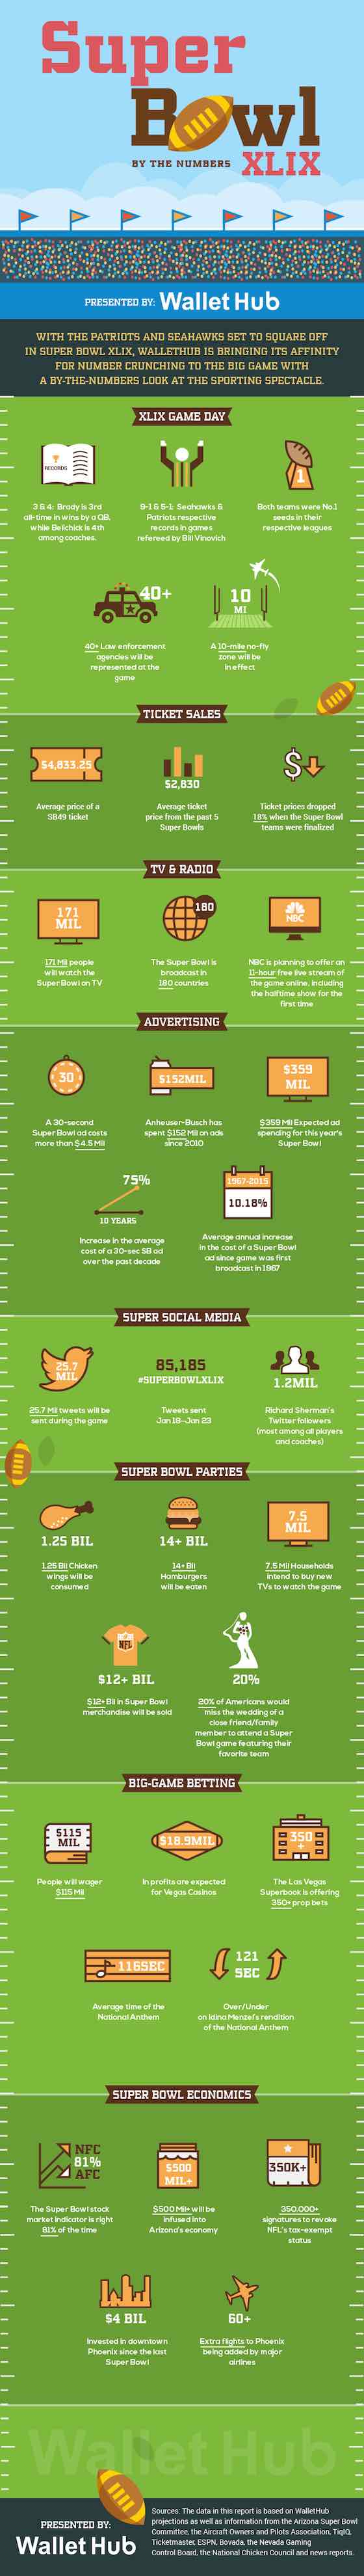 Infographic: Super Bowl XLIX by the Numbers